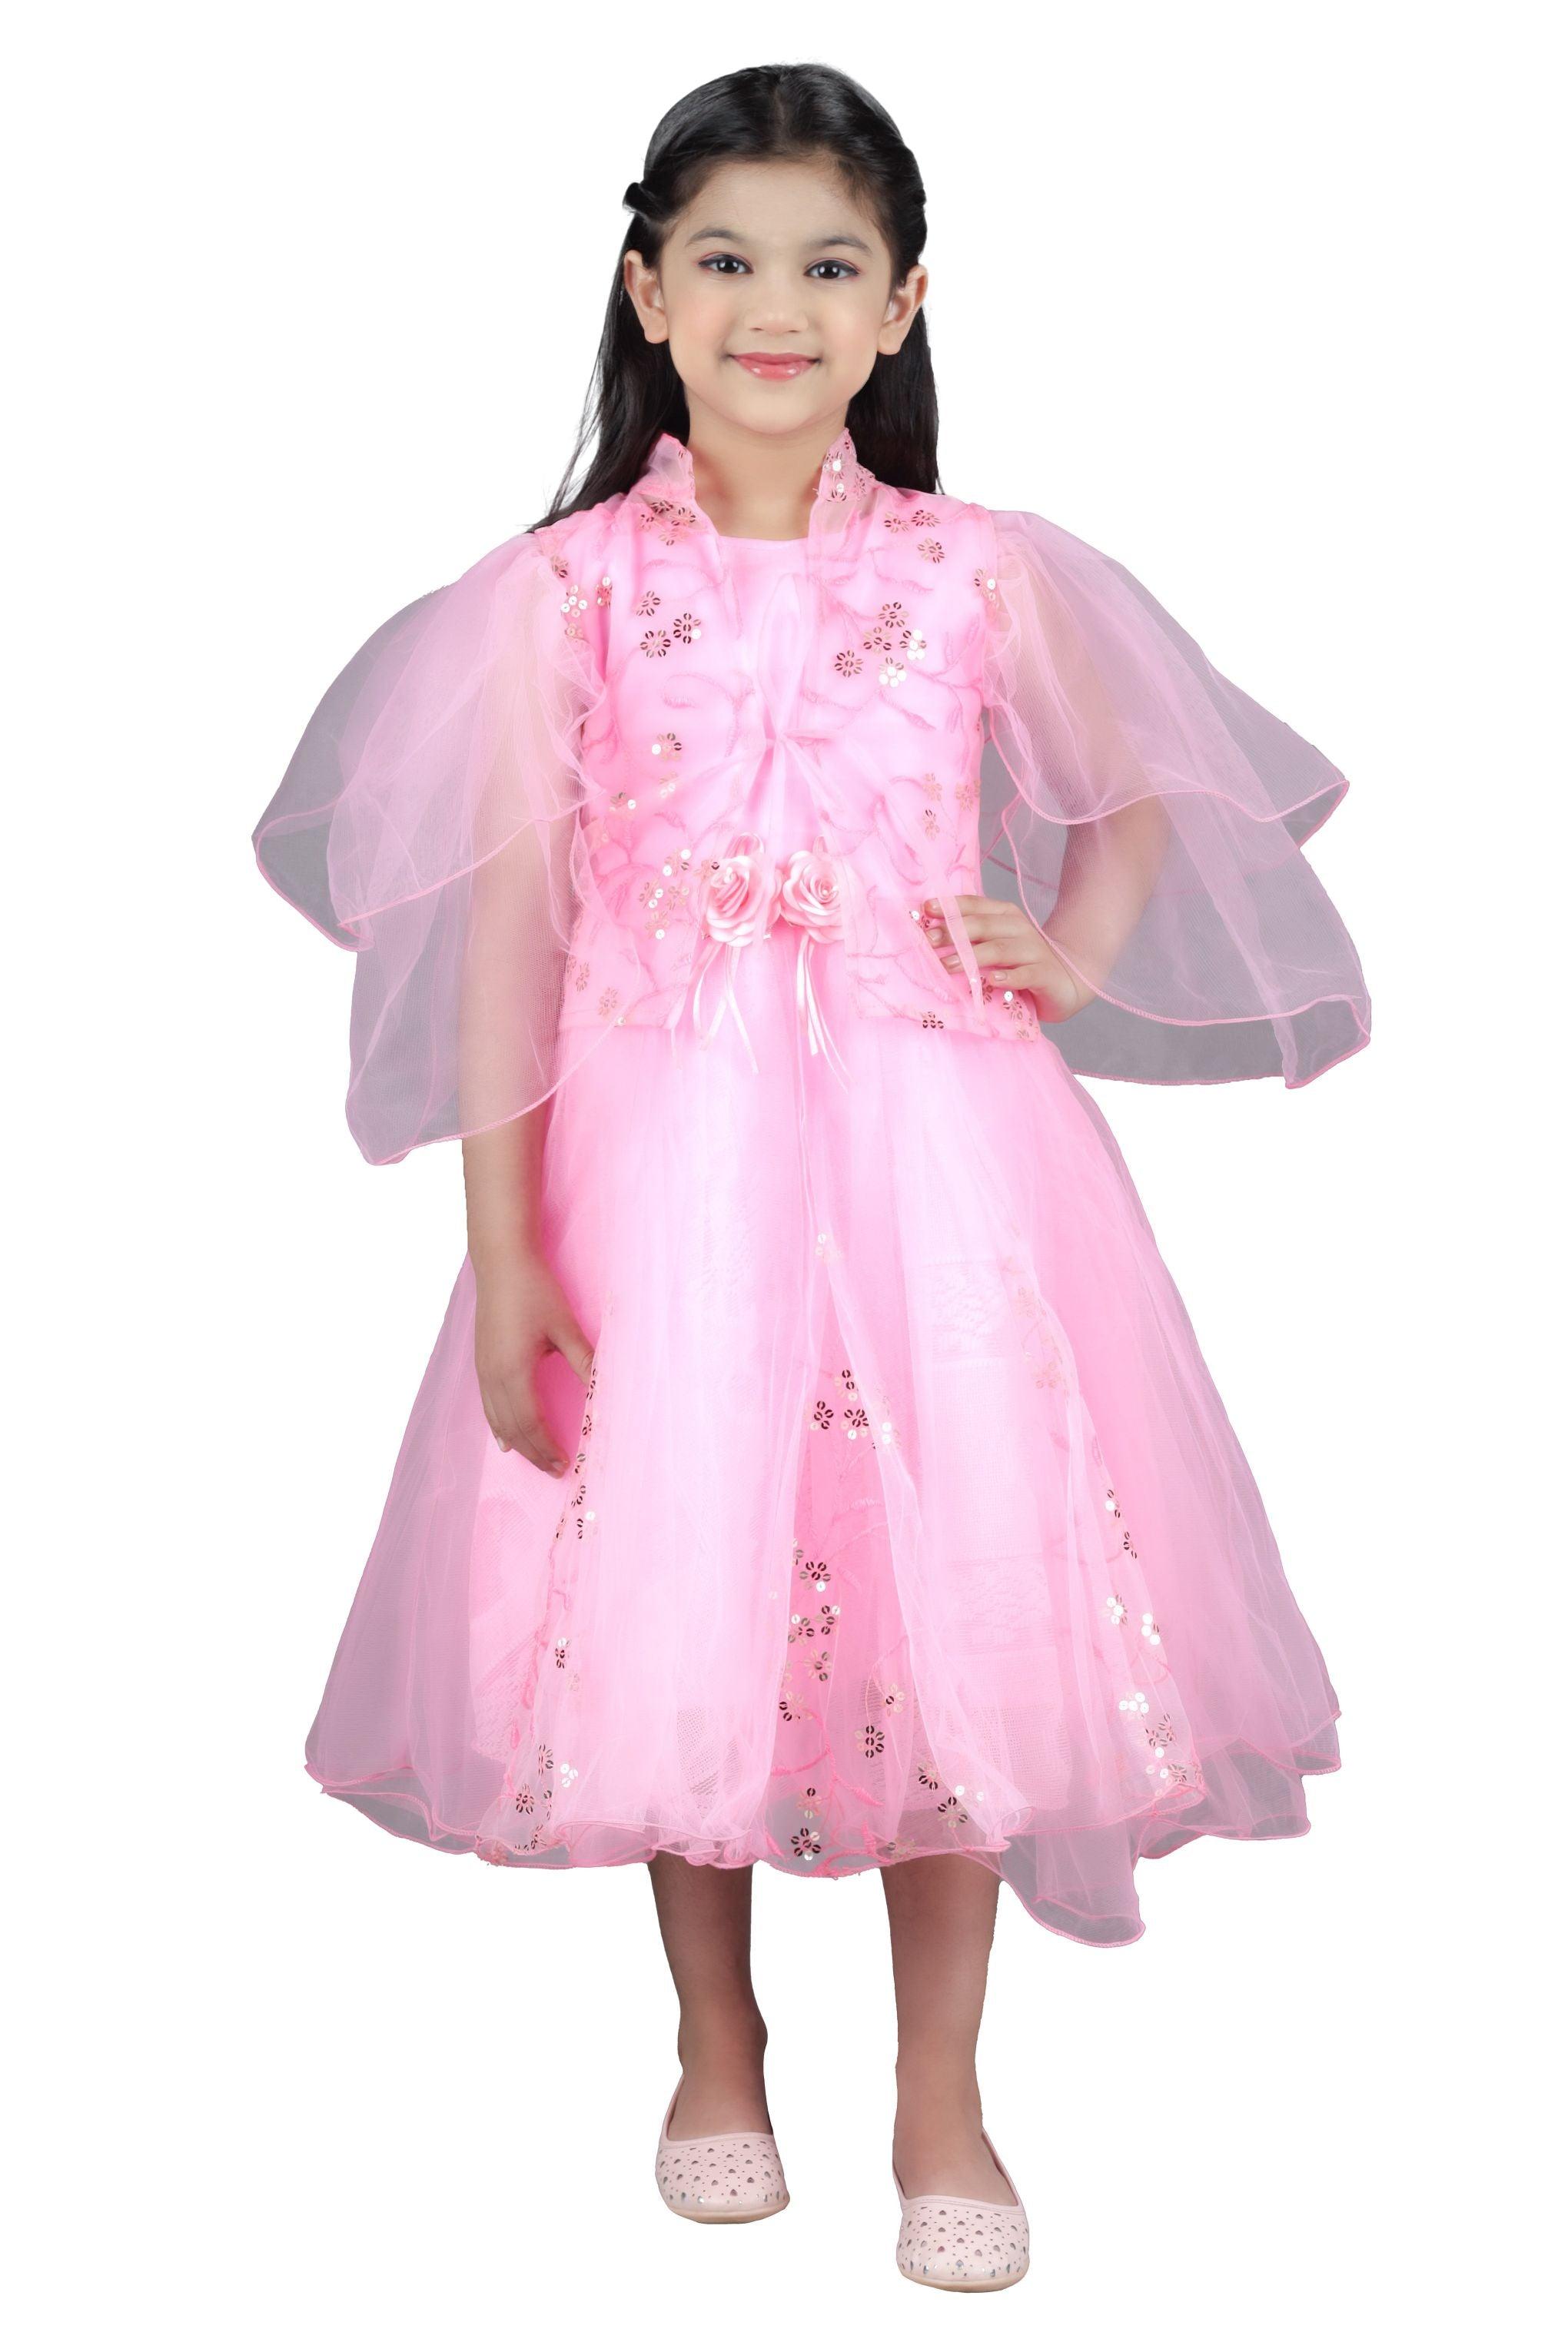 Doll Fashion Midi/Knee Length Festive/Party Pari Dress for Girls Pink 16 :  Amazon.in: Clothing & Accessories